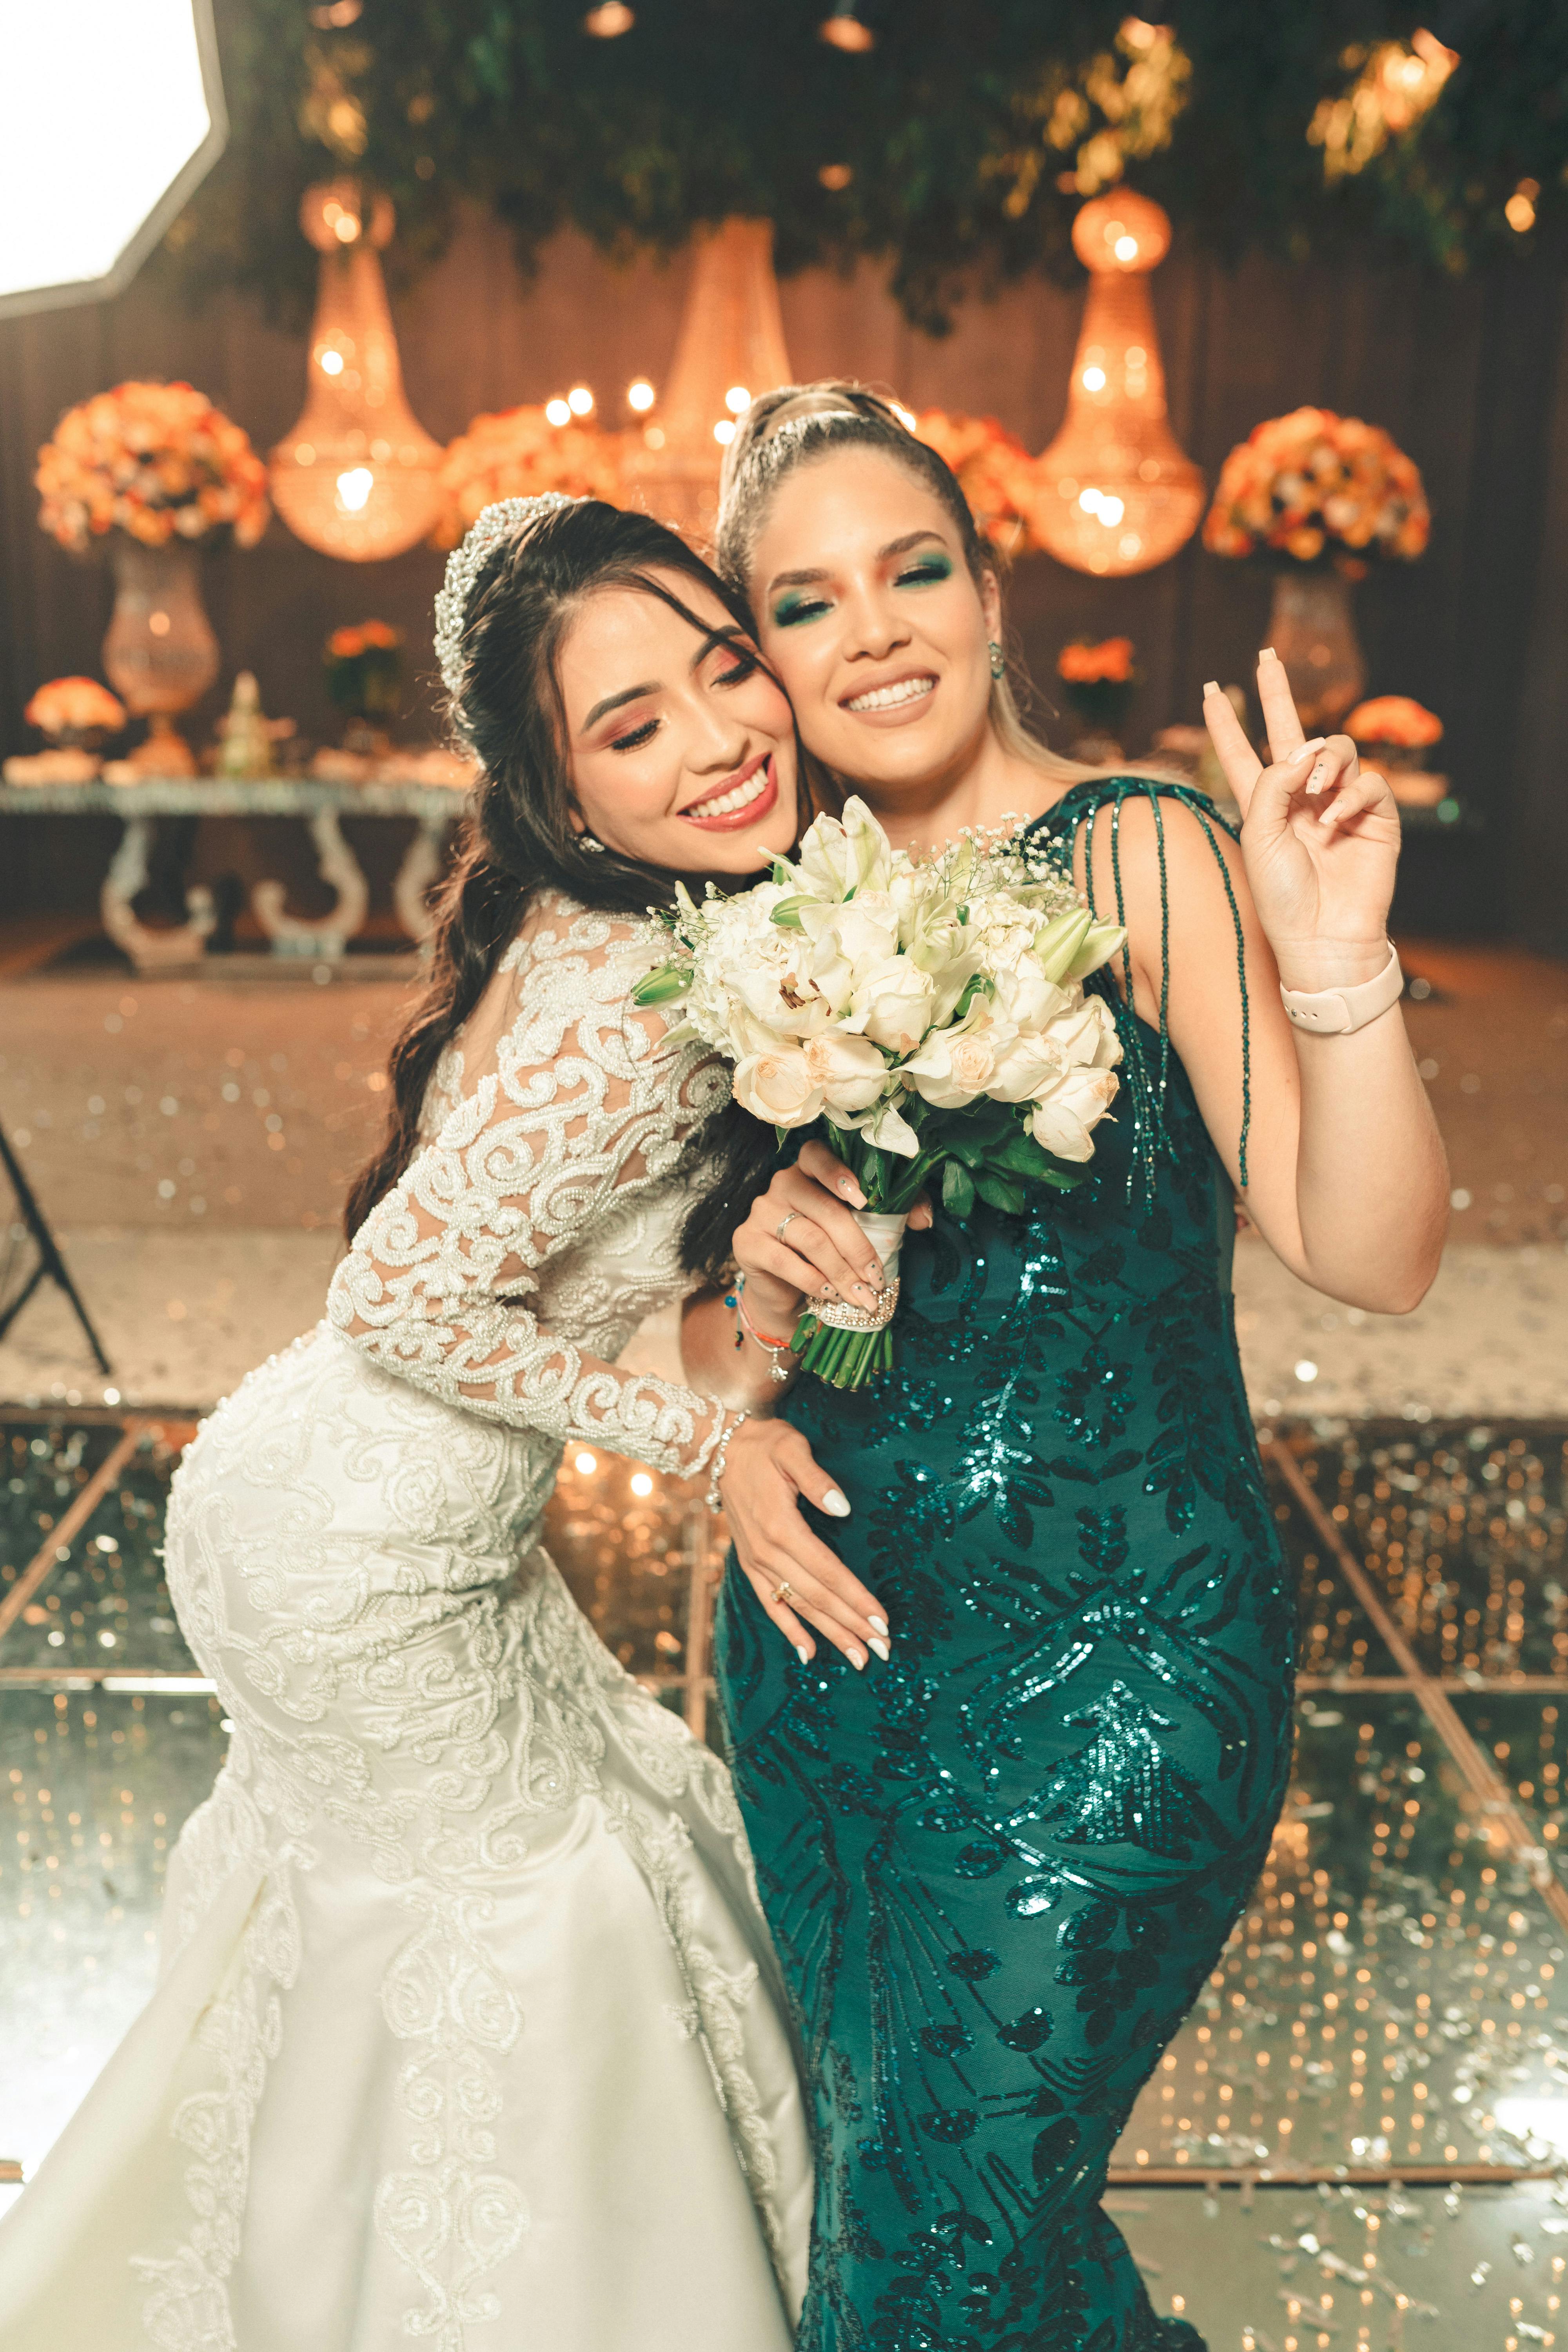 The bride and her sister-in-law | Source: Pexels